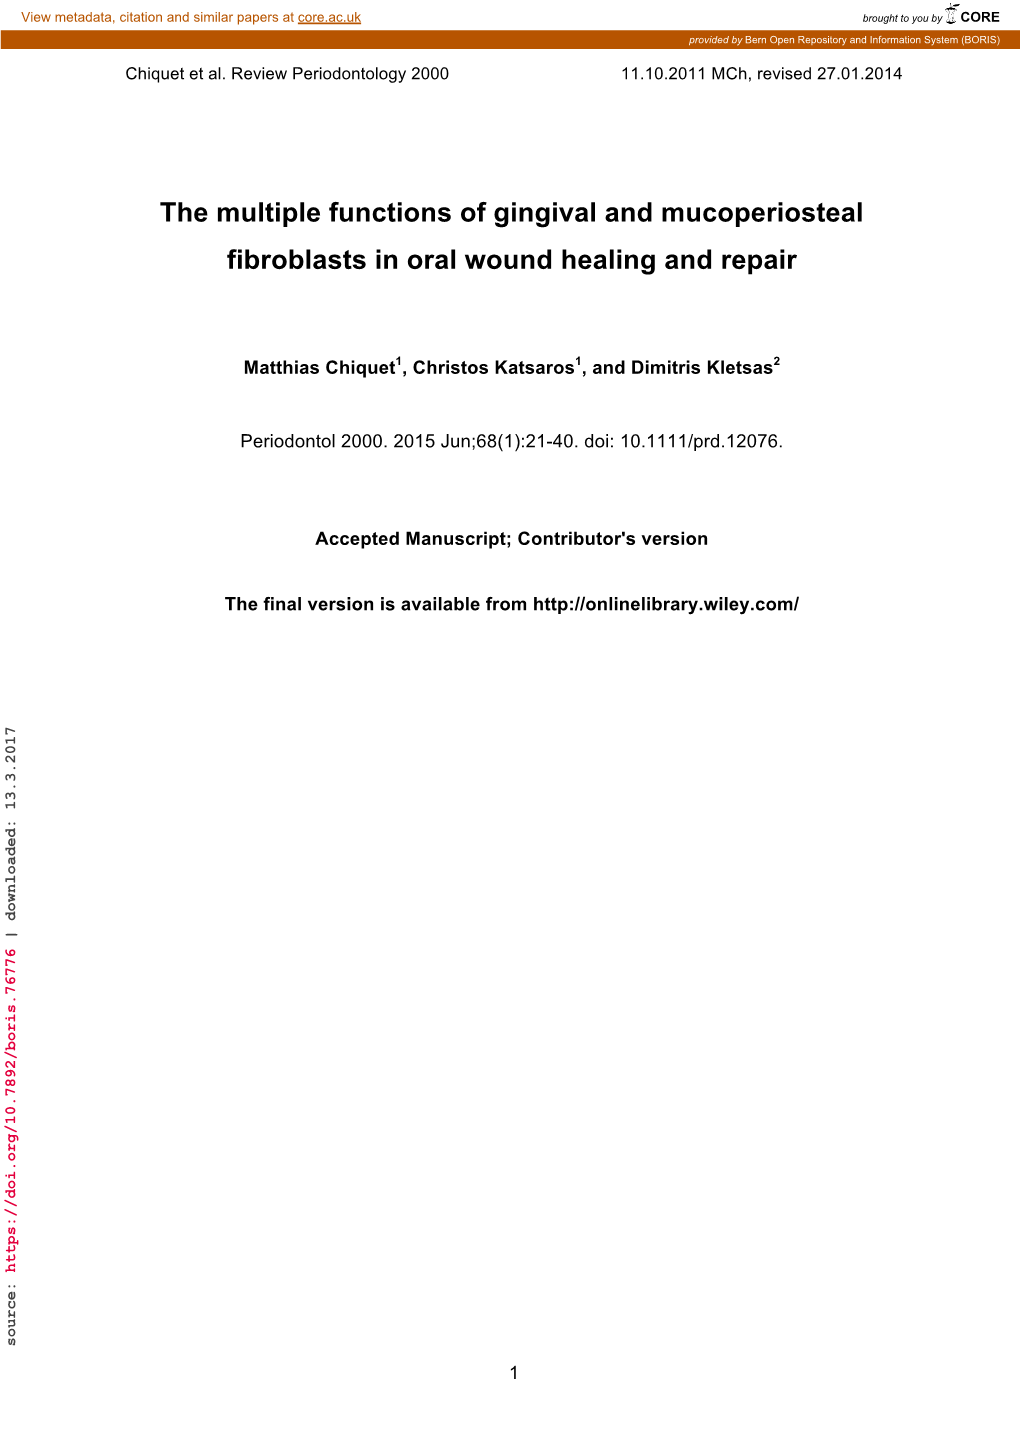 The Multiple Functions of Gingival and Mucoperiosteal Fibroblasts in Oral Wound Healing and Repair